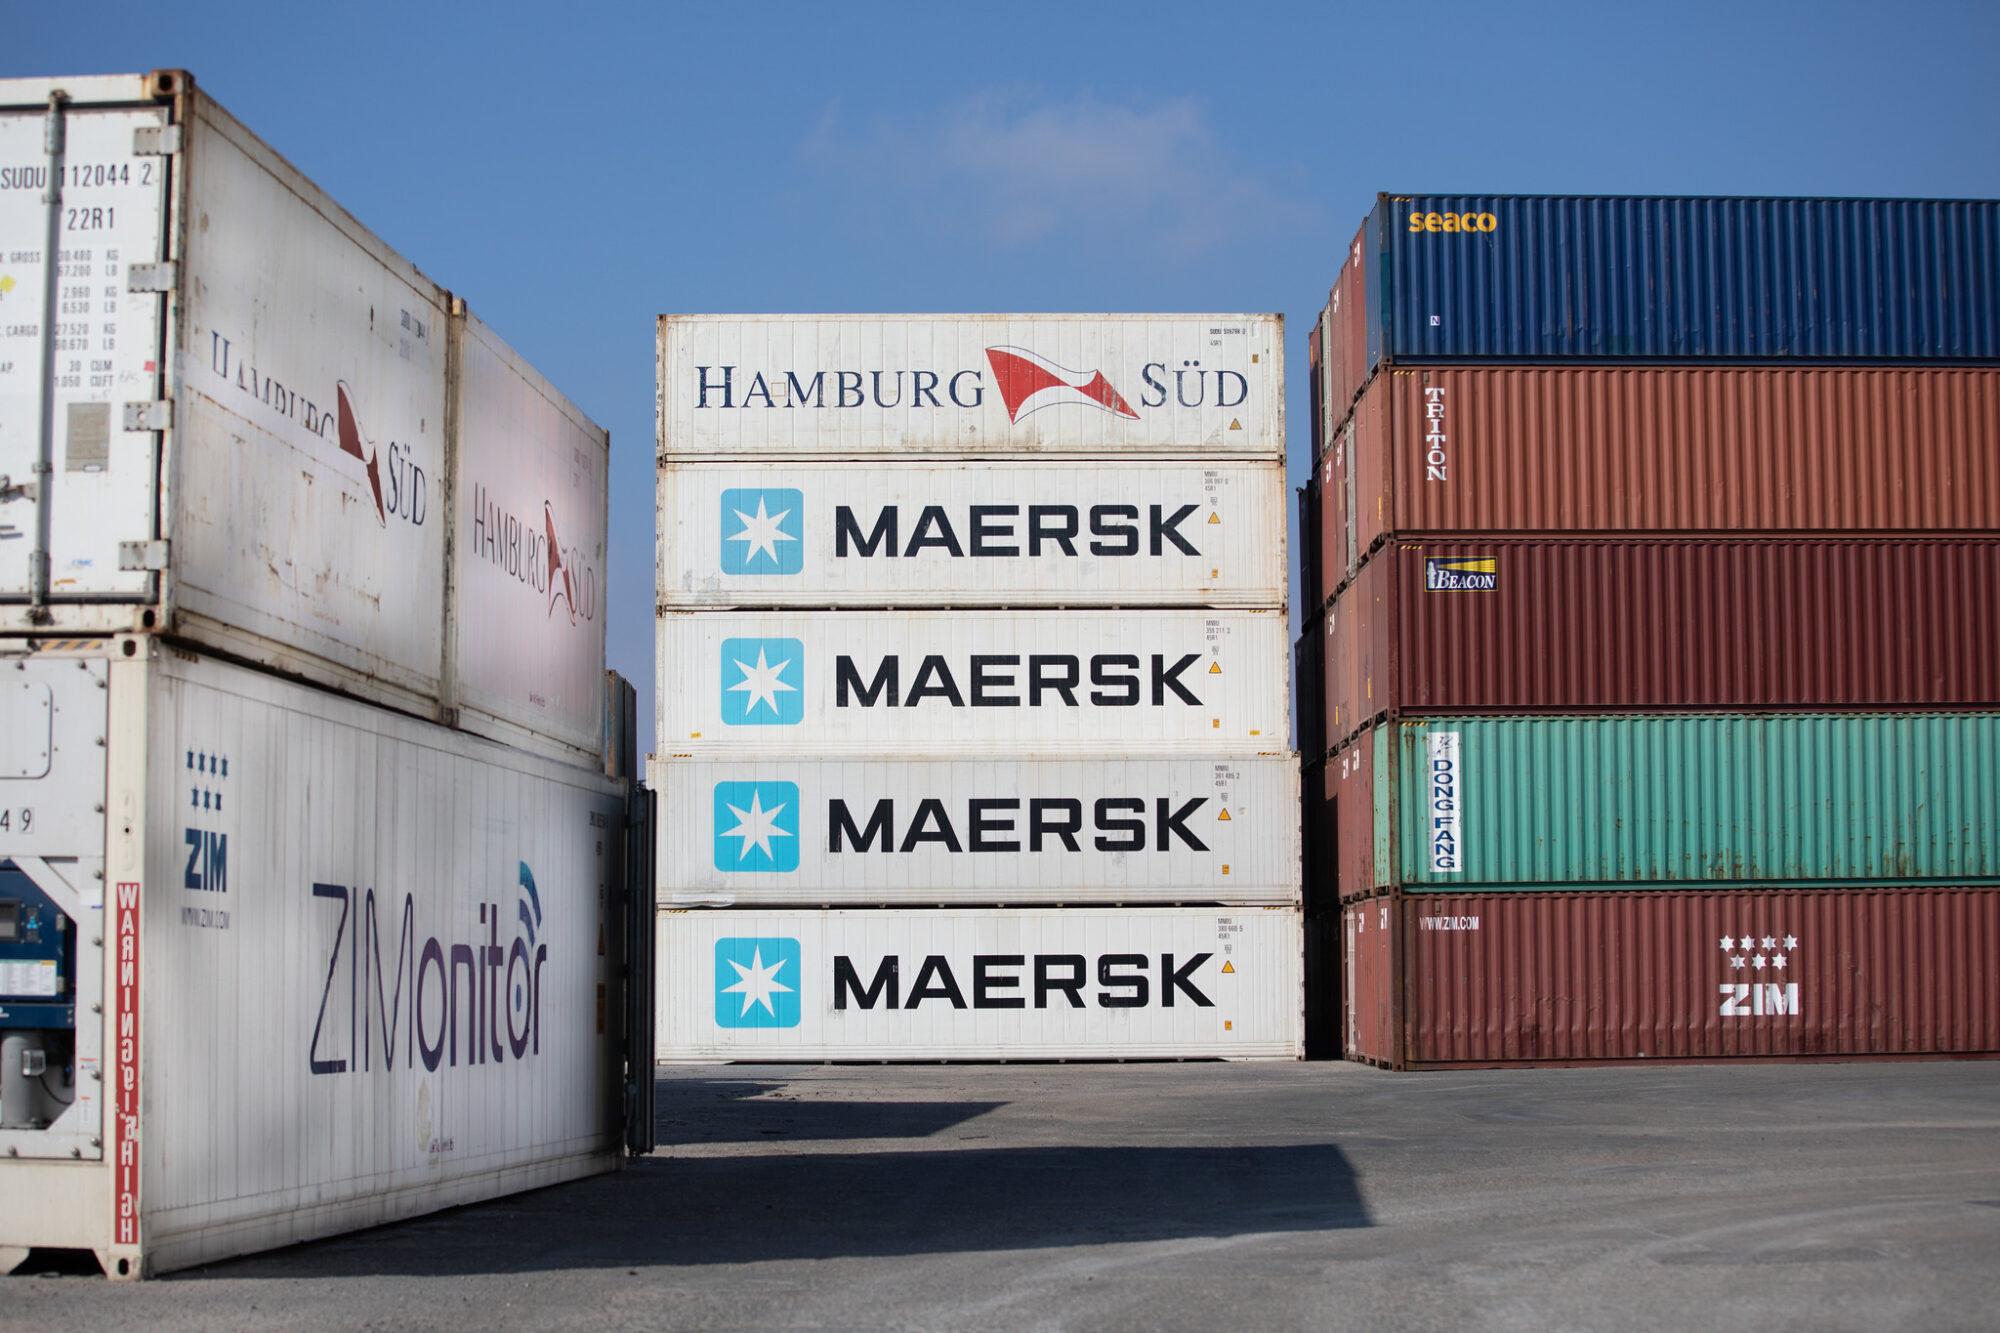 Maersk, the world's largest container shipping company